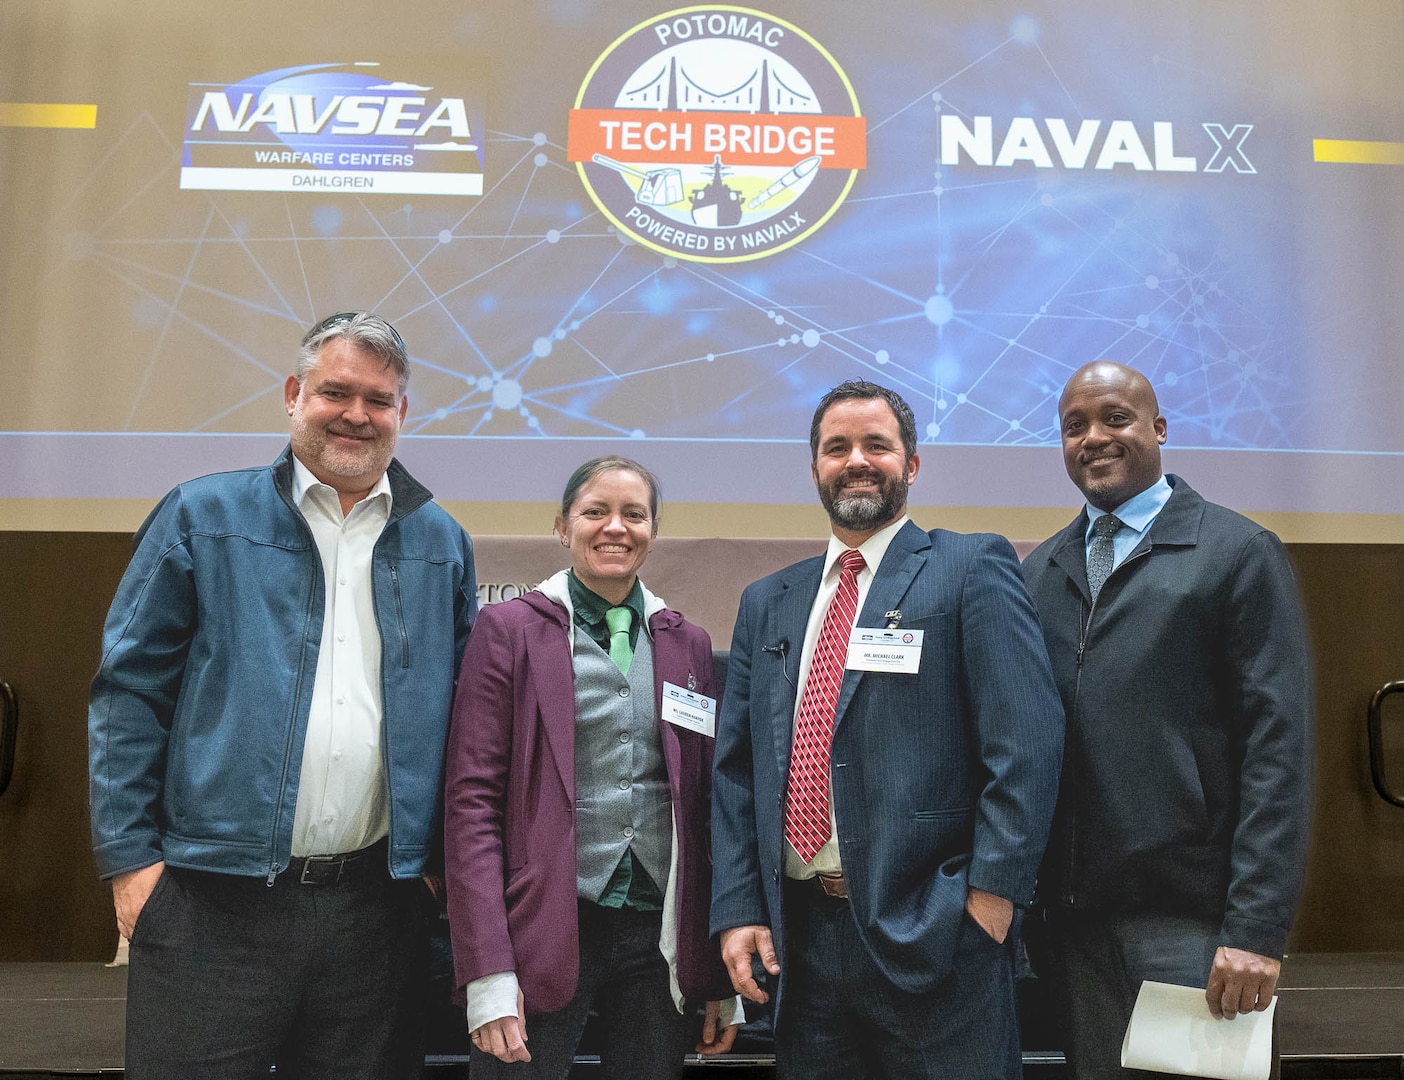 IMAGE: Naval Surface Warfare Center Dahlgren Division Potomac Tech Bridge Director Michael Clark (third from left) stands with Southern Maryland Tech Bridge Director Rick Tarr (left), Capital Tech Bridge Director Lauren Hanyhok (second from left) and Mid-Atlantic Tech Bridge Director Gerrold Walker (right) at the Potomac Tech Bridge kickoff event Dec. 12 at University of Mary Washington Dahlgren Campus.